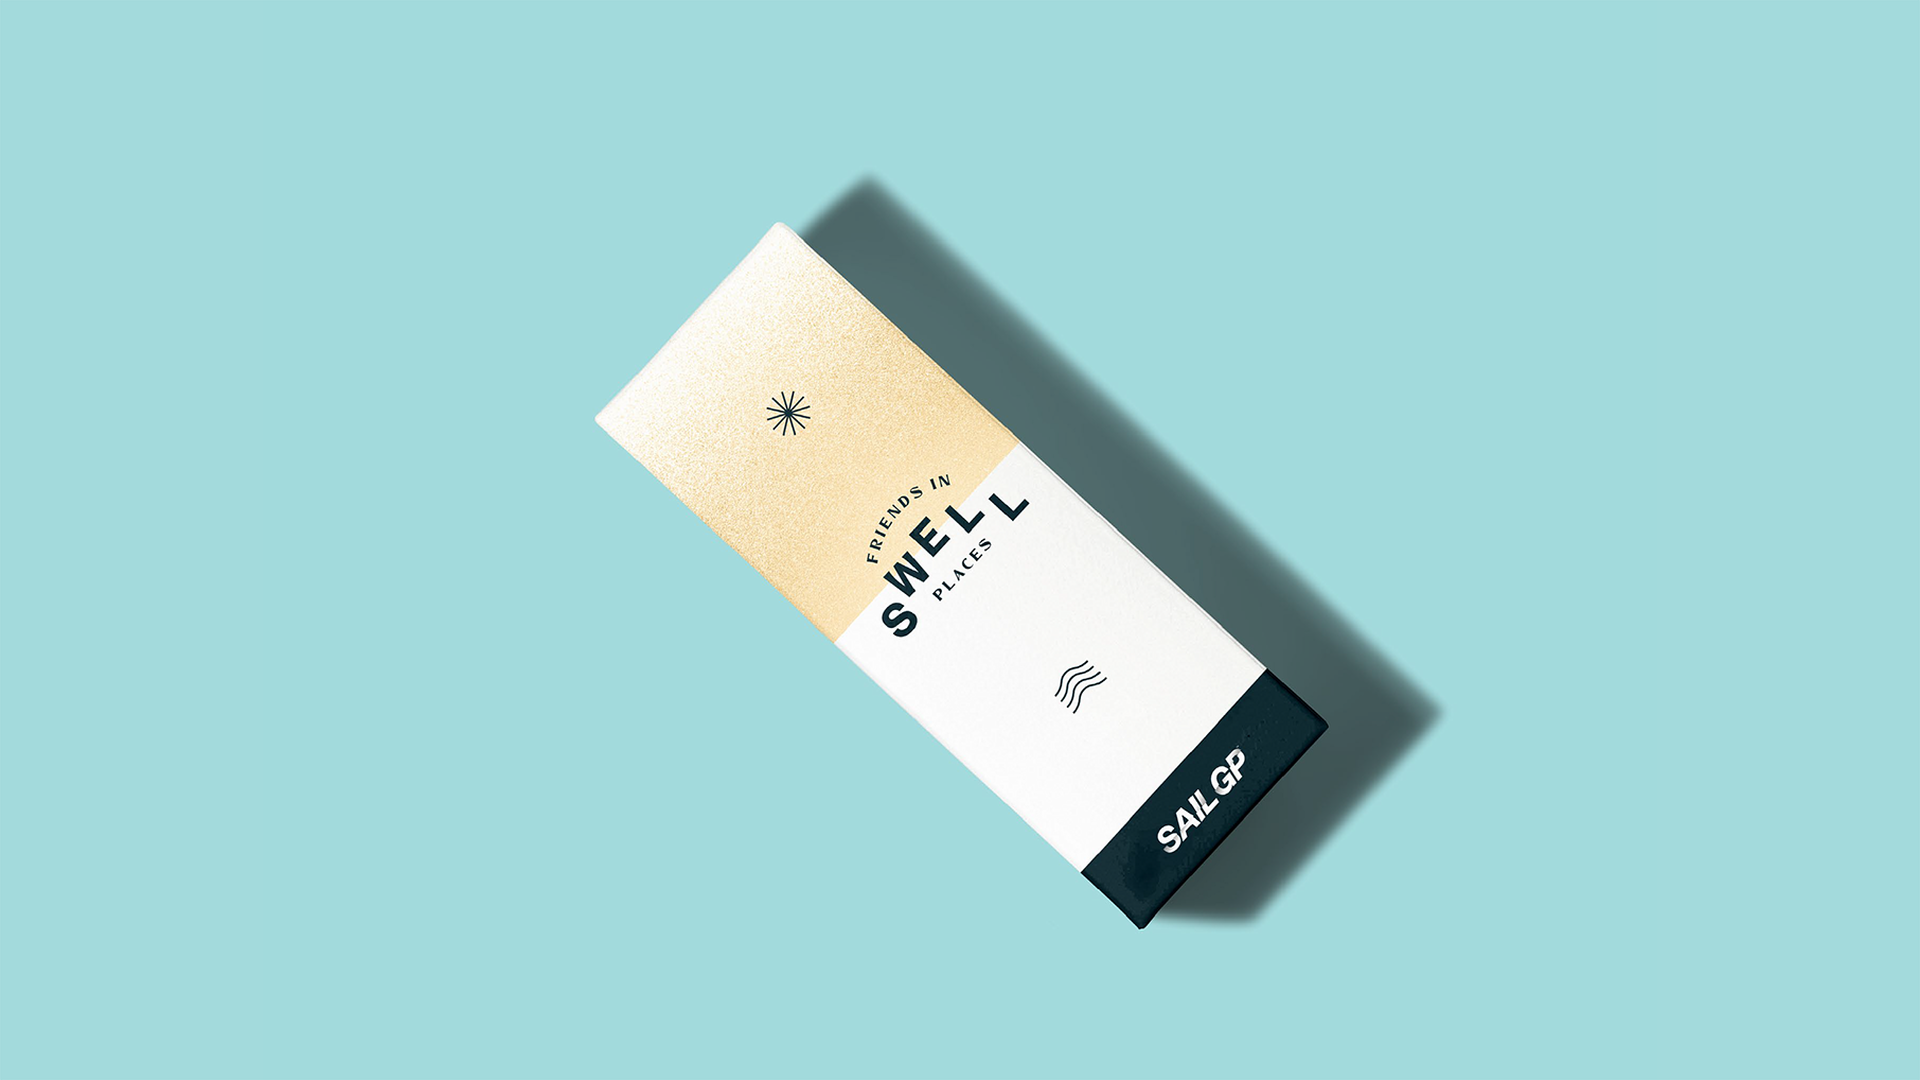 Concept of a Sail GP Friends in Swell Places branded case